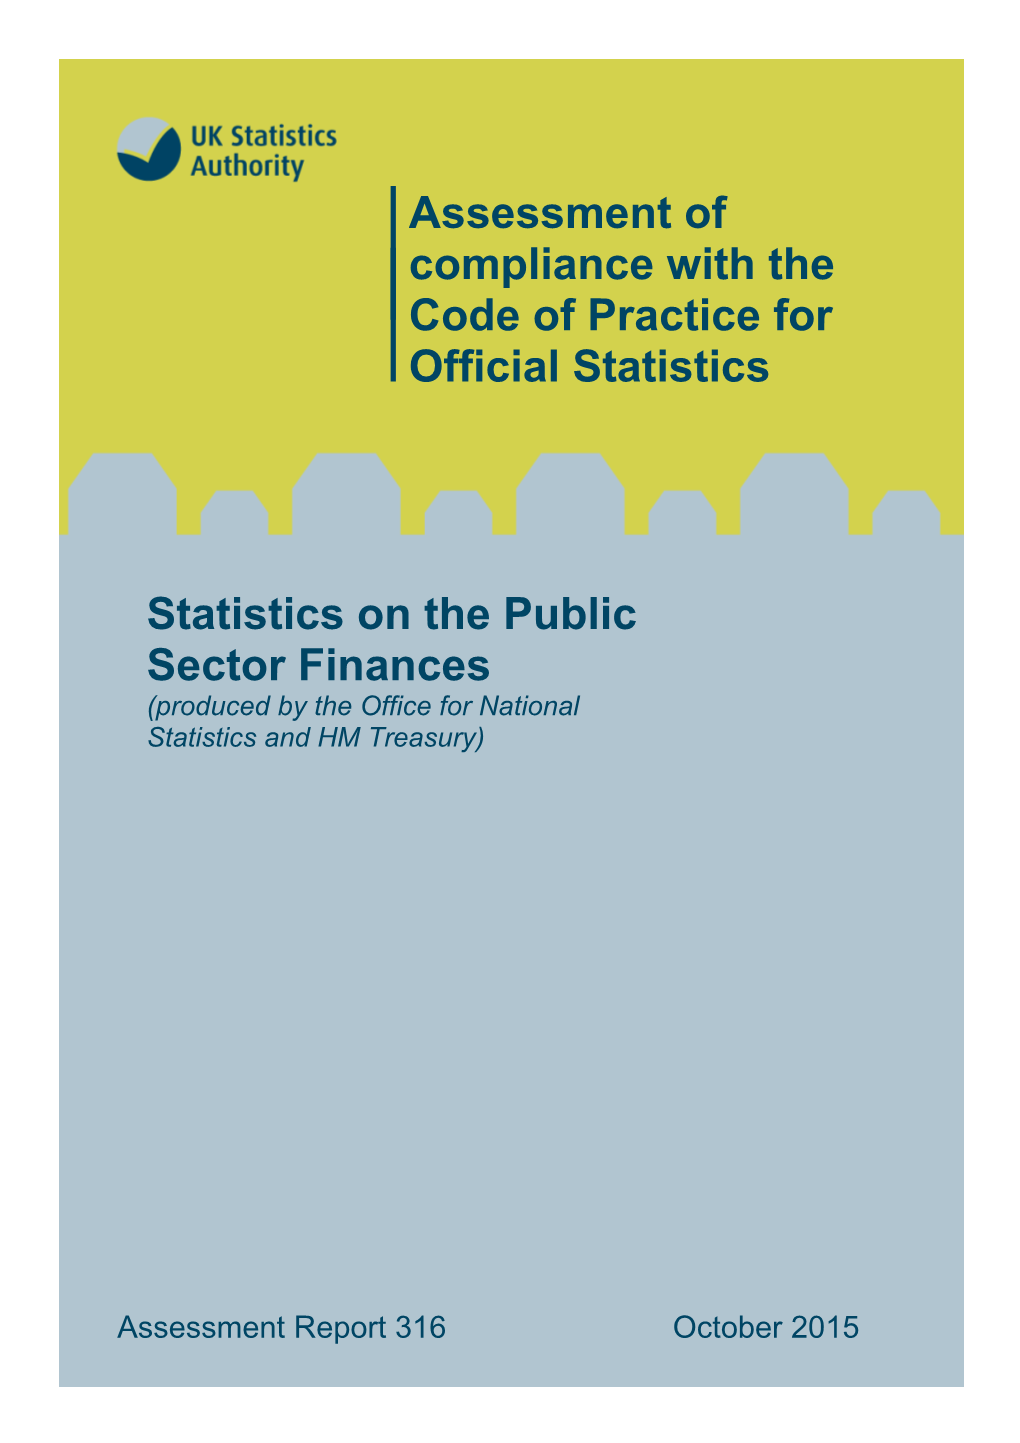 Assessment of Compliance with the Code of Practice for Official Statistics